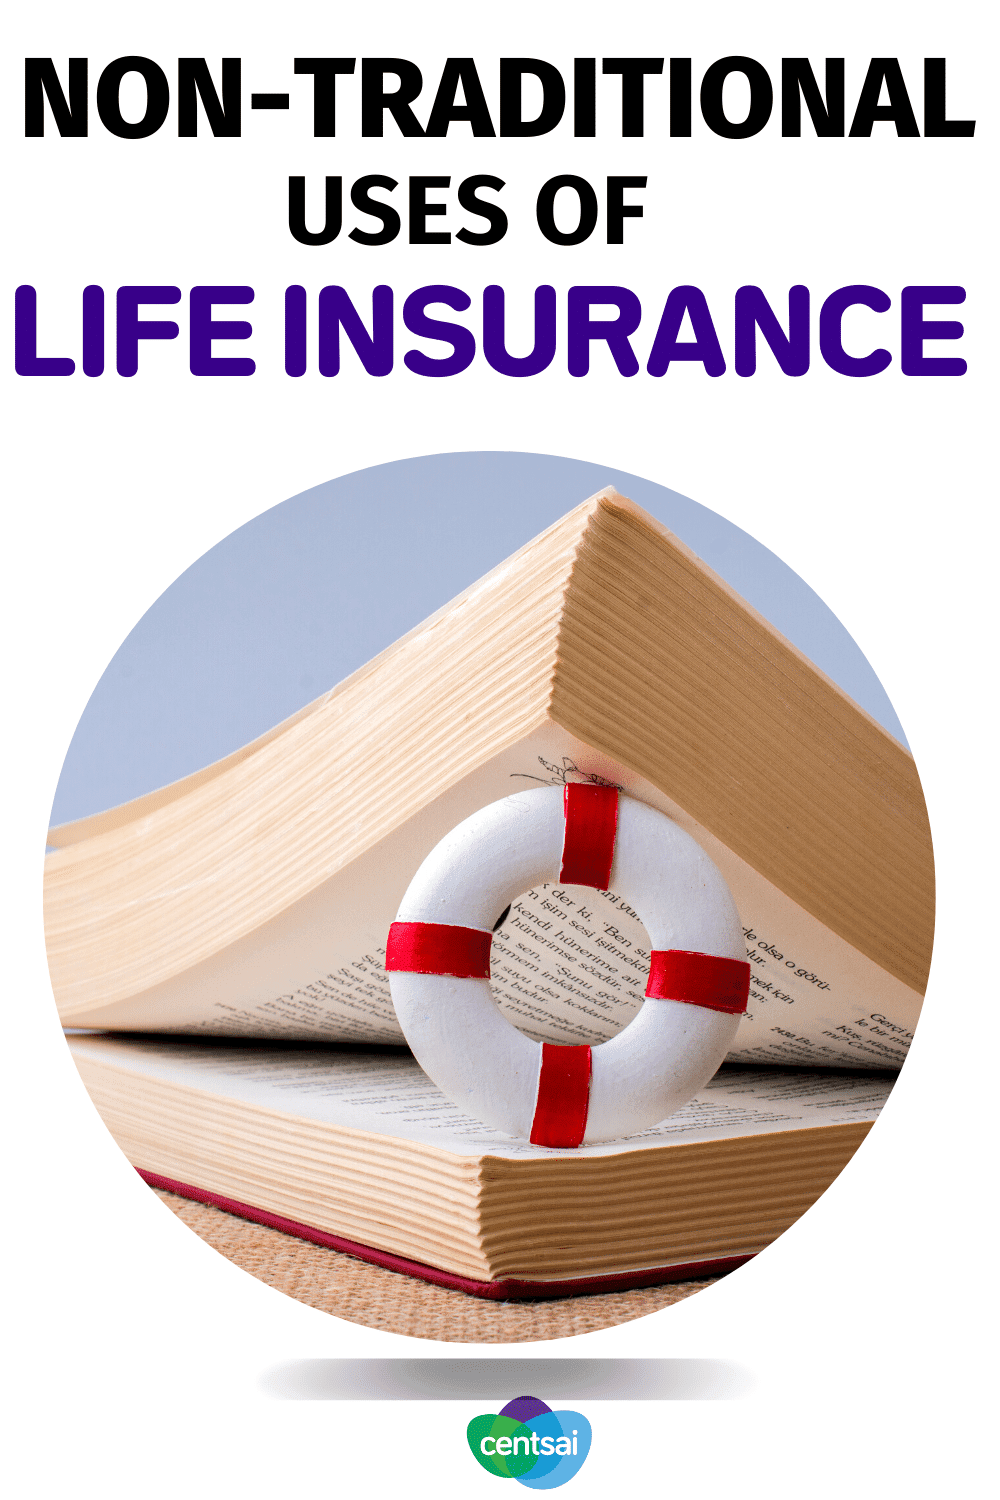 Non-Traditional Uses of Life Insurance